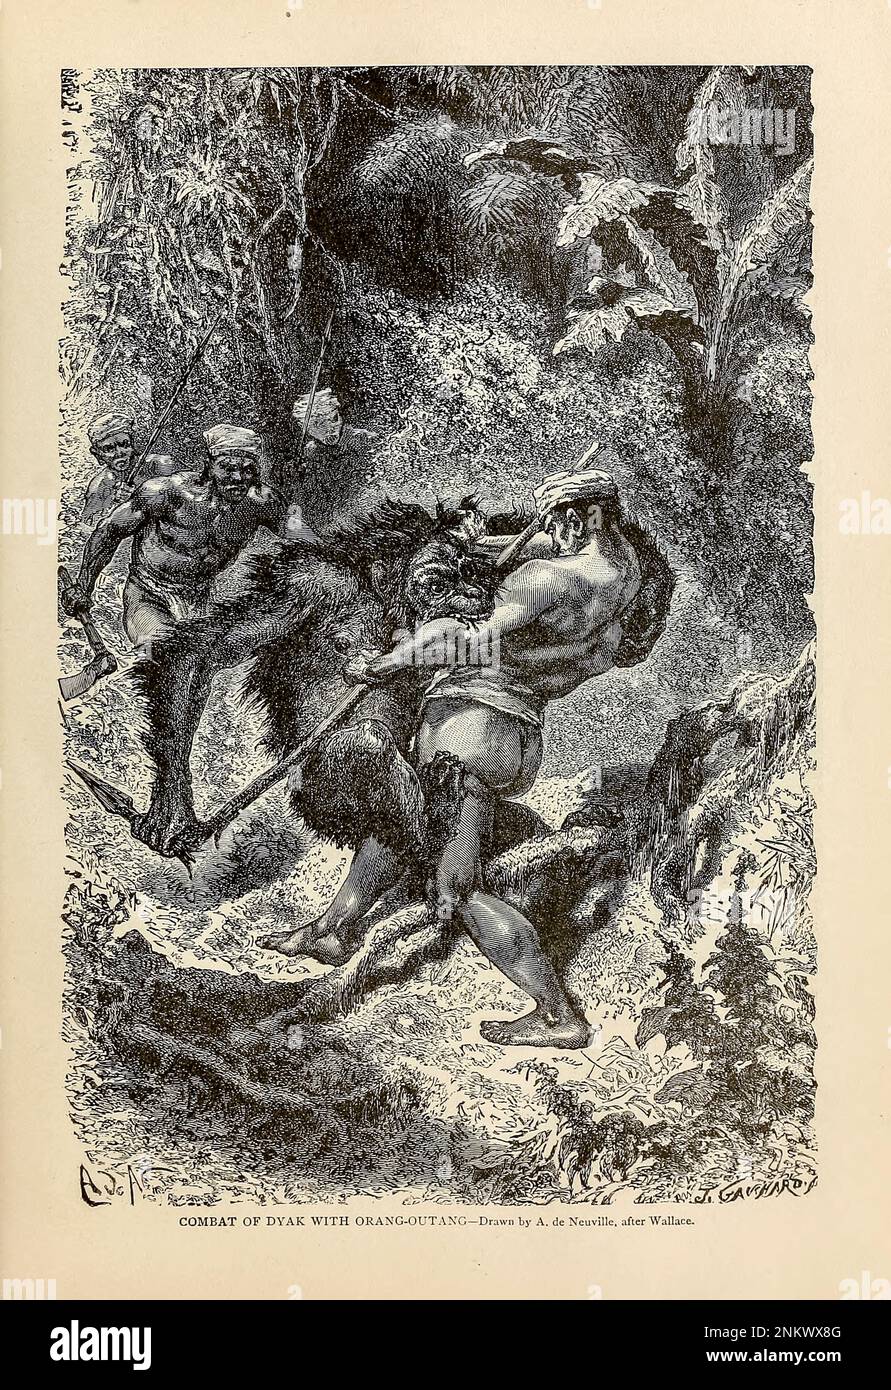 Combat of Dyak or Dayak with Orangutan Drawn by A de Neuville after Wallace Chapter XXI - The Malays from Cyclopedia universal history : embracing the most complete and recent presentation of the subject in two principal parts or divisions of more than six thousand pages by John Clark Ridpath, 1840-1900 Publication date 1895 Publisher Boston : Balch Bros. Volume 6 History of Man and Mankind Stock Photo